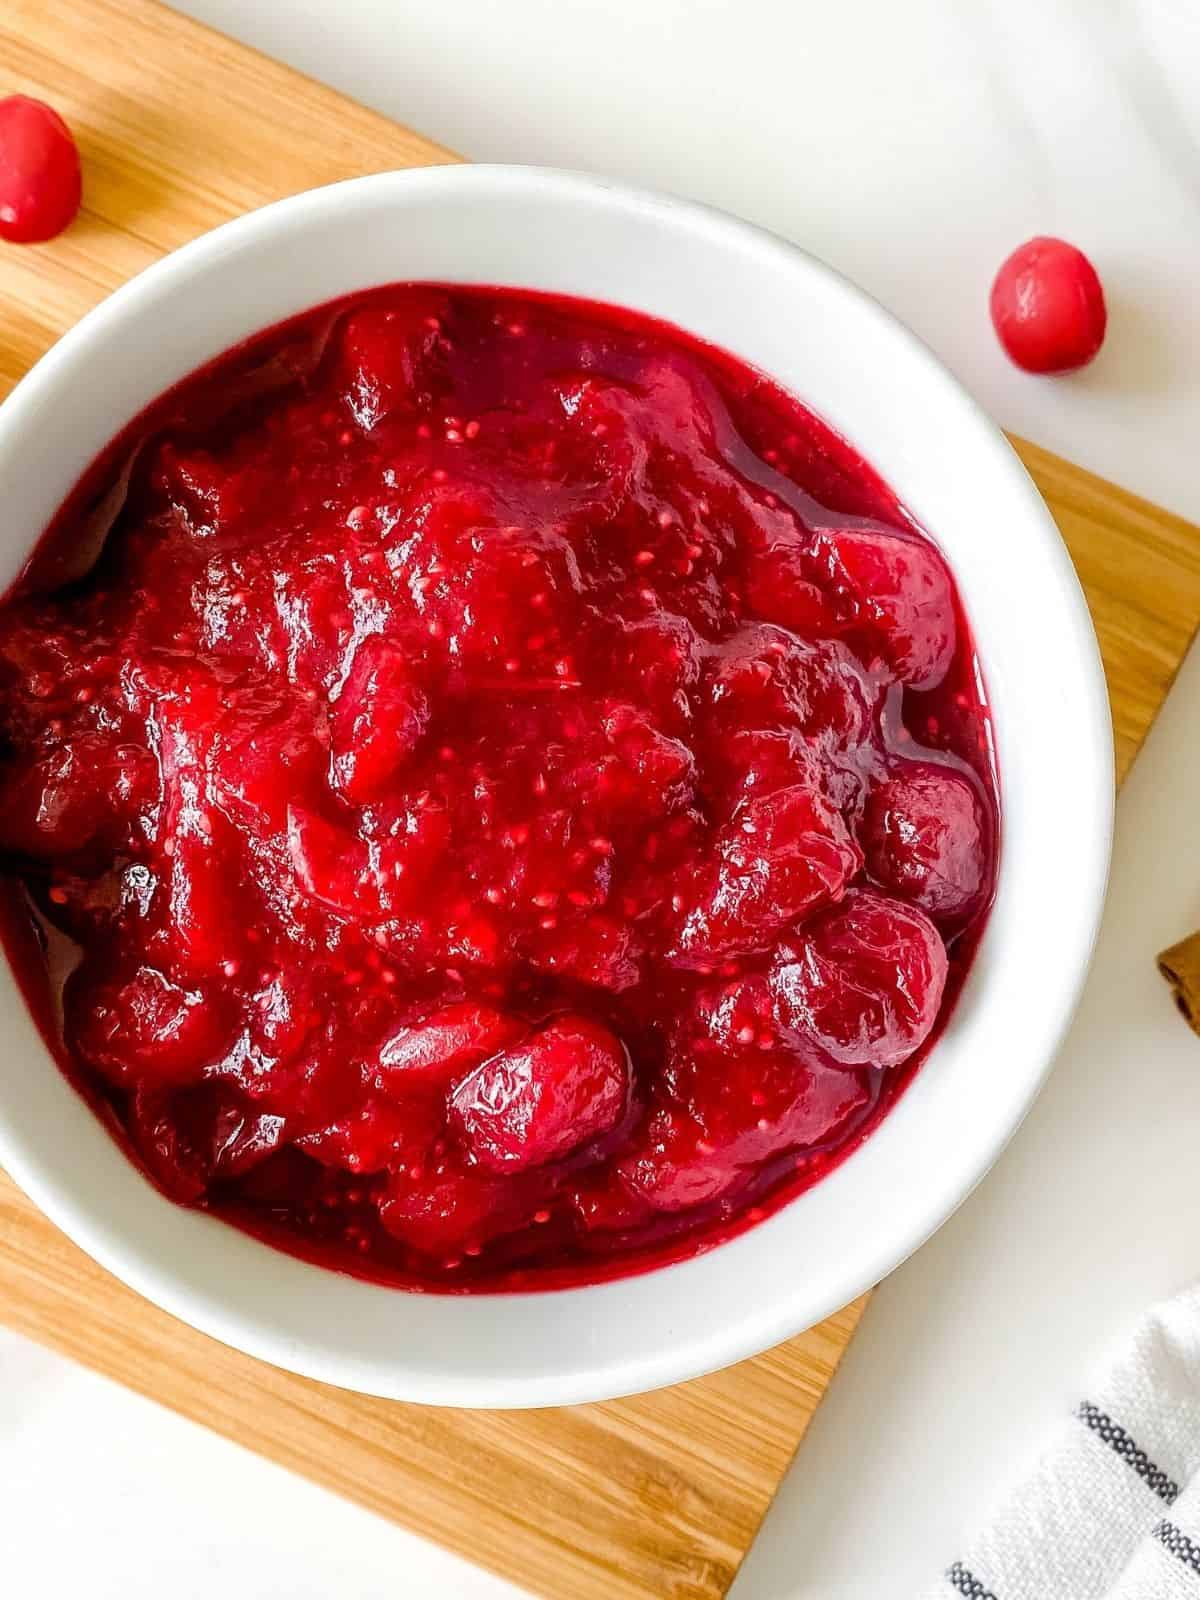 cranberry sauce in a white bowl on a wooden board.